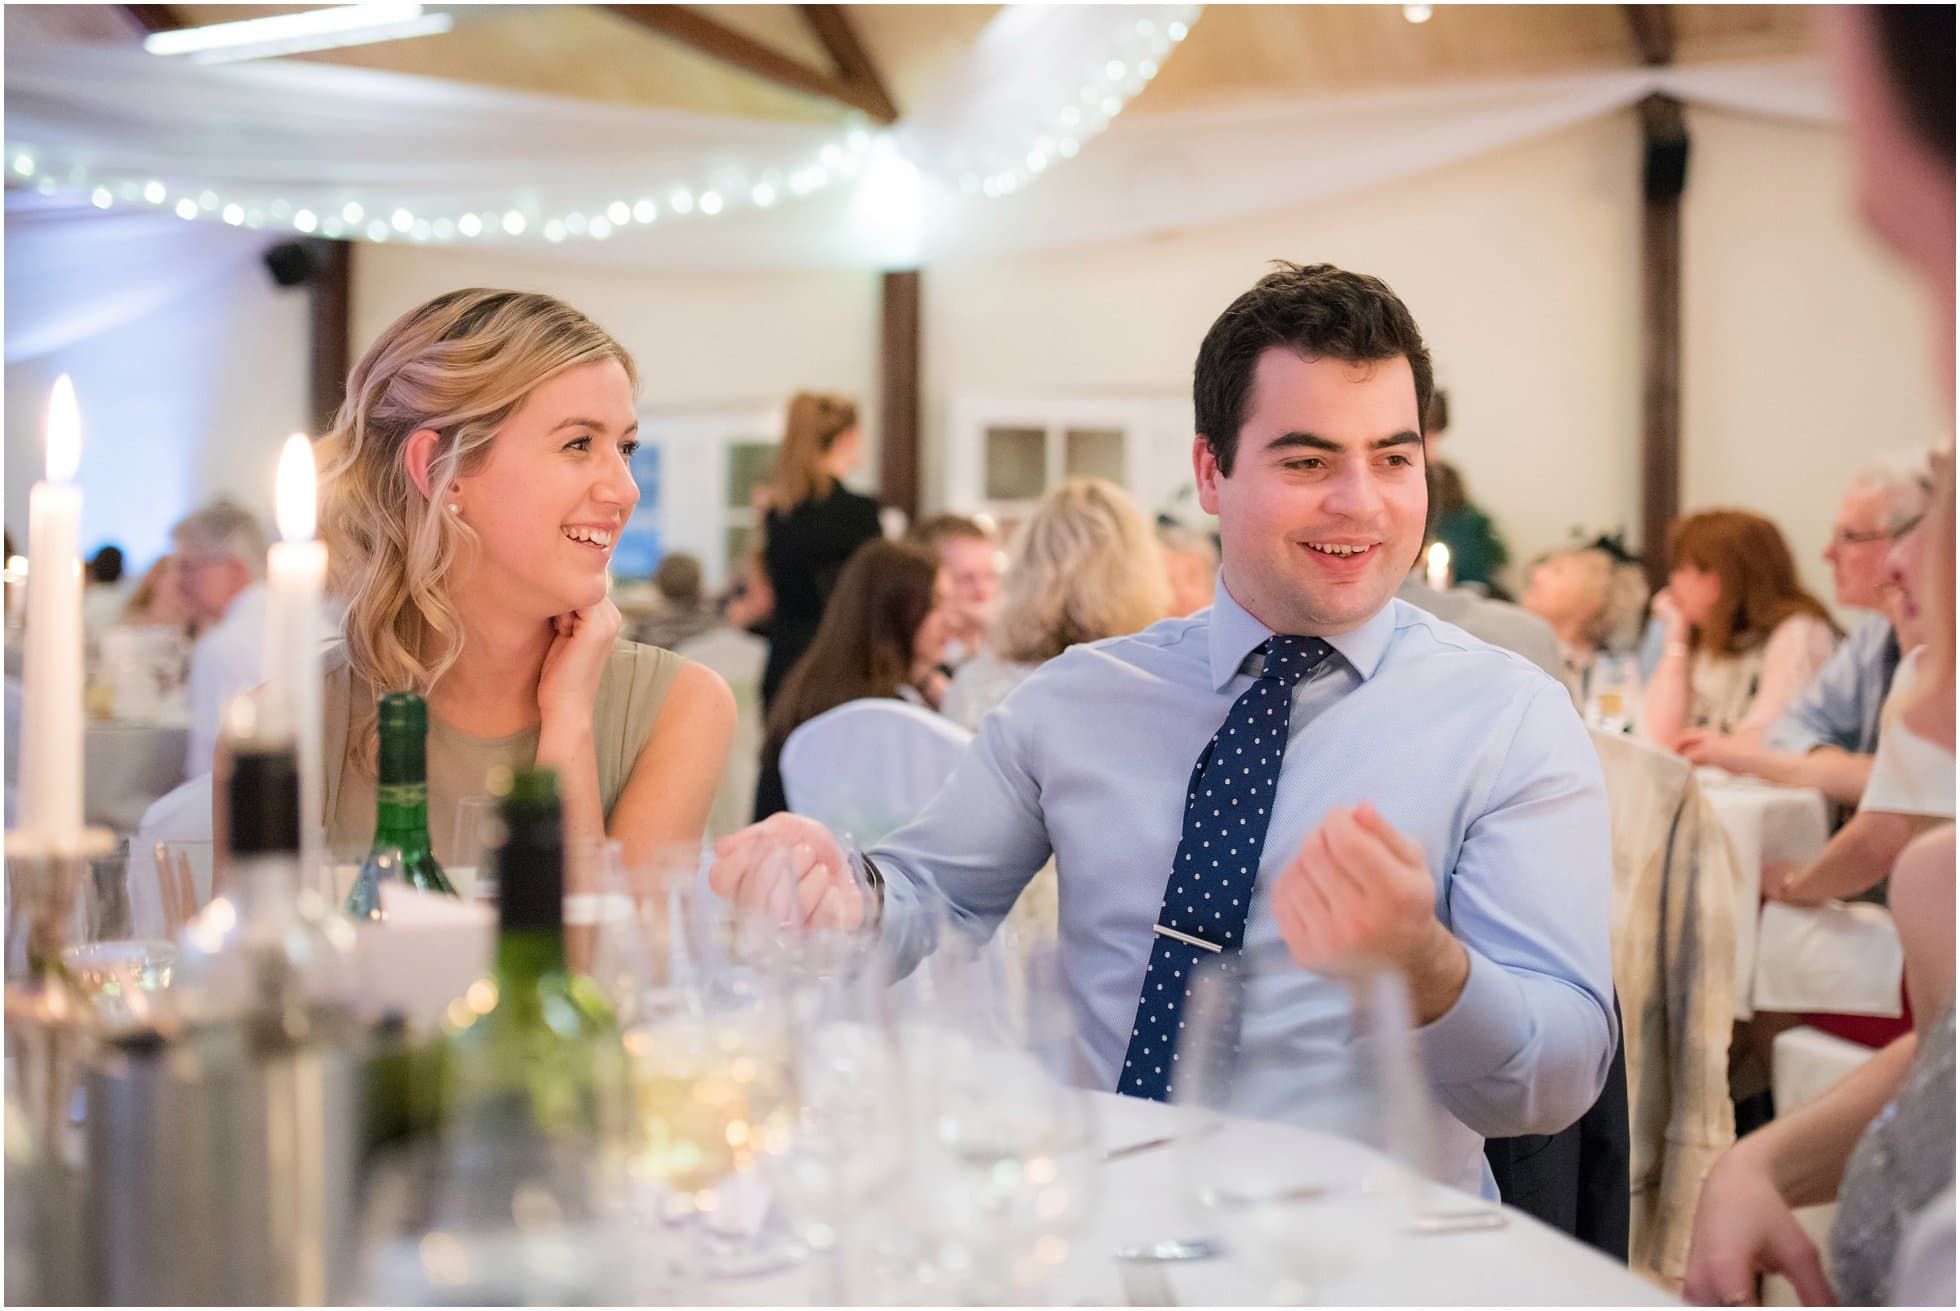 Guests having a laugh at the wedding breakfast